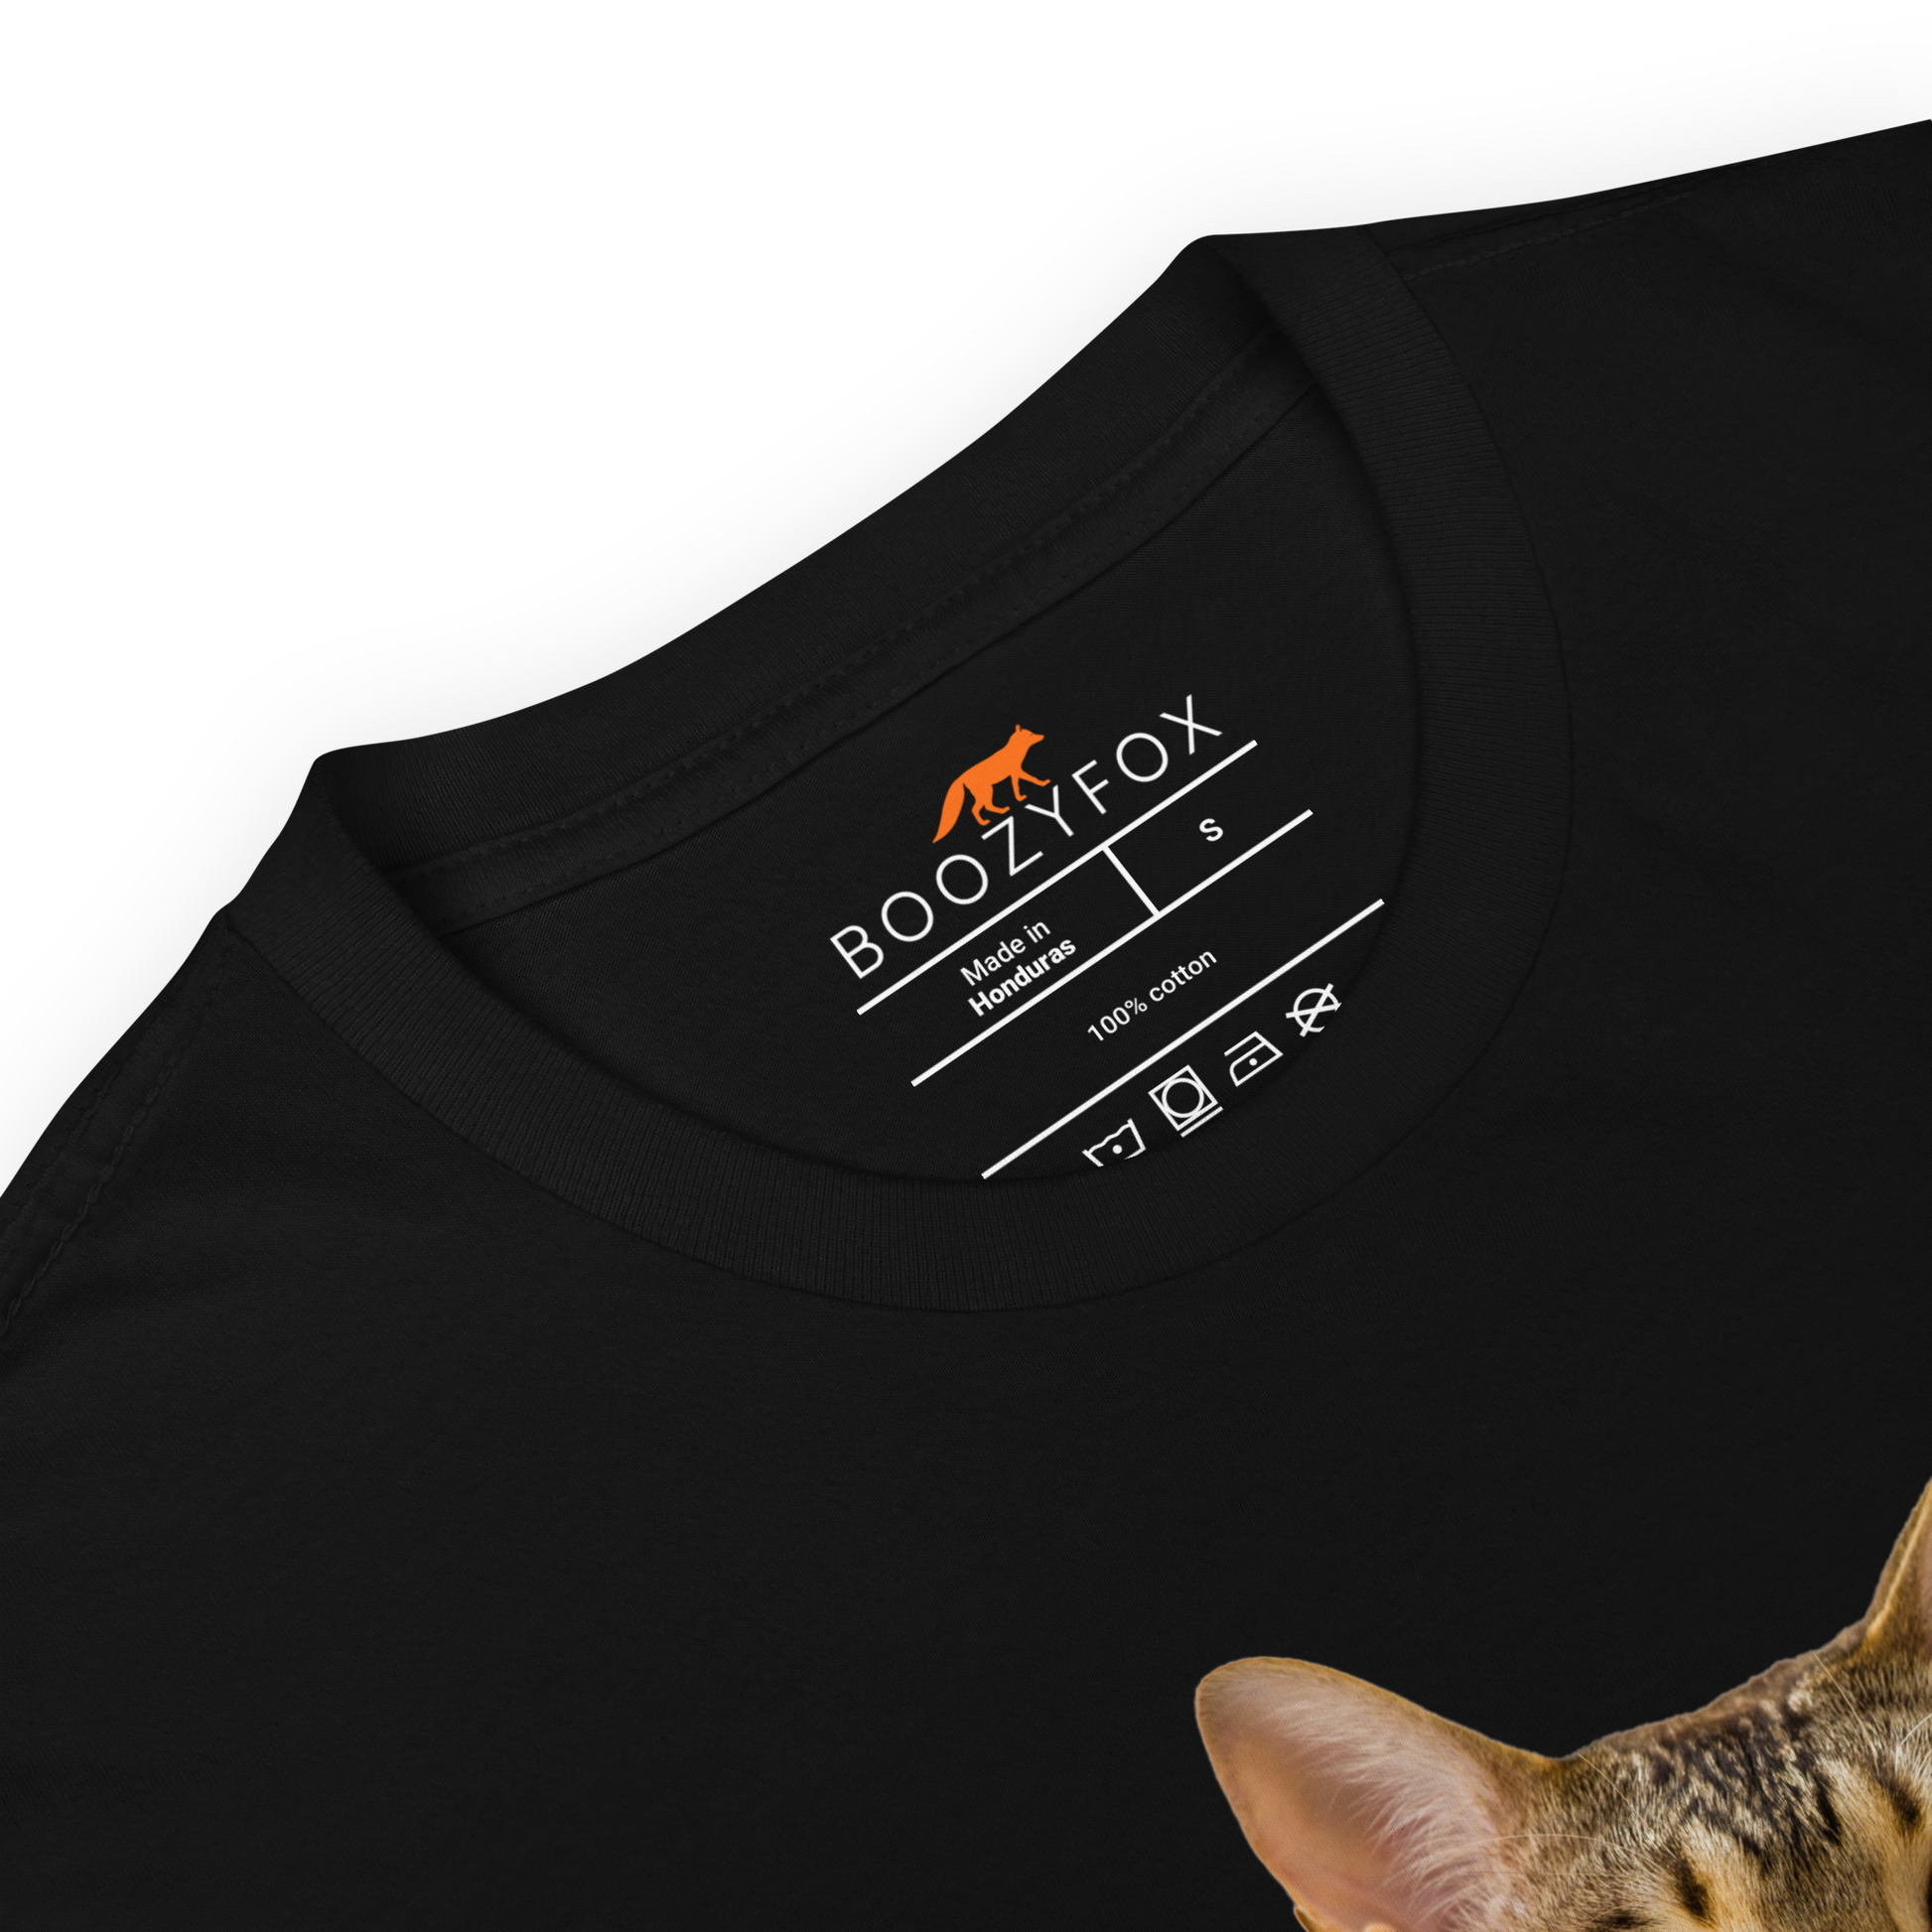 Product Details of a Black Cat T-Shirt featuring a Purrfect graphic on the chest - Funny Graphic Cat T-Shirts - Boozy Fox